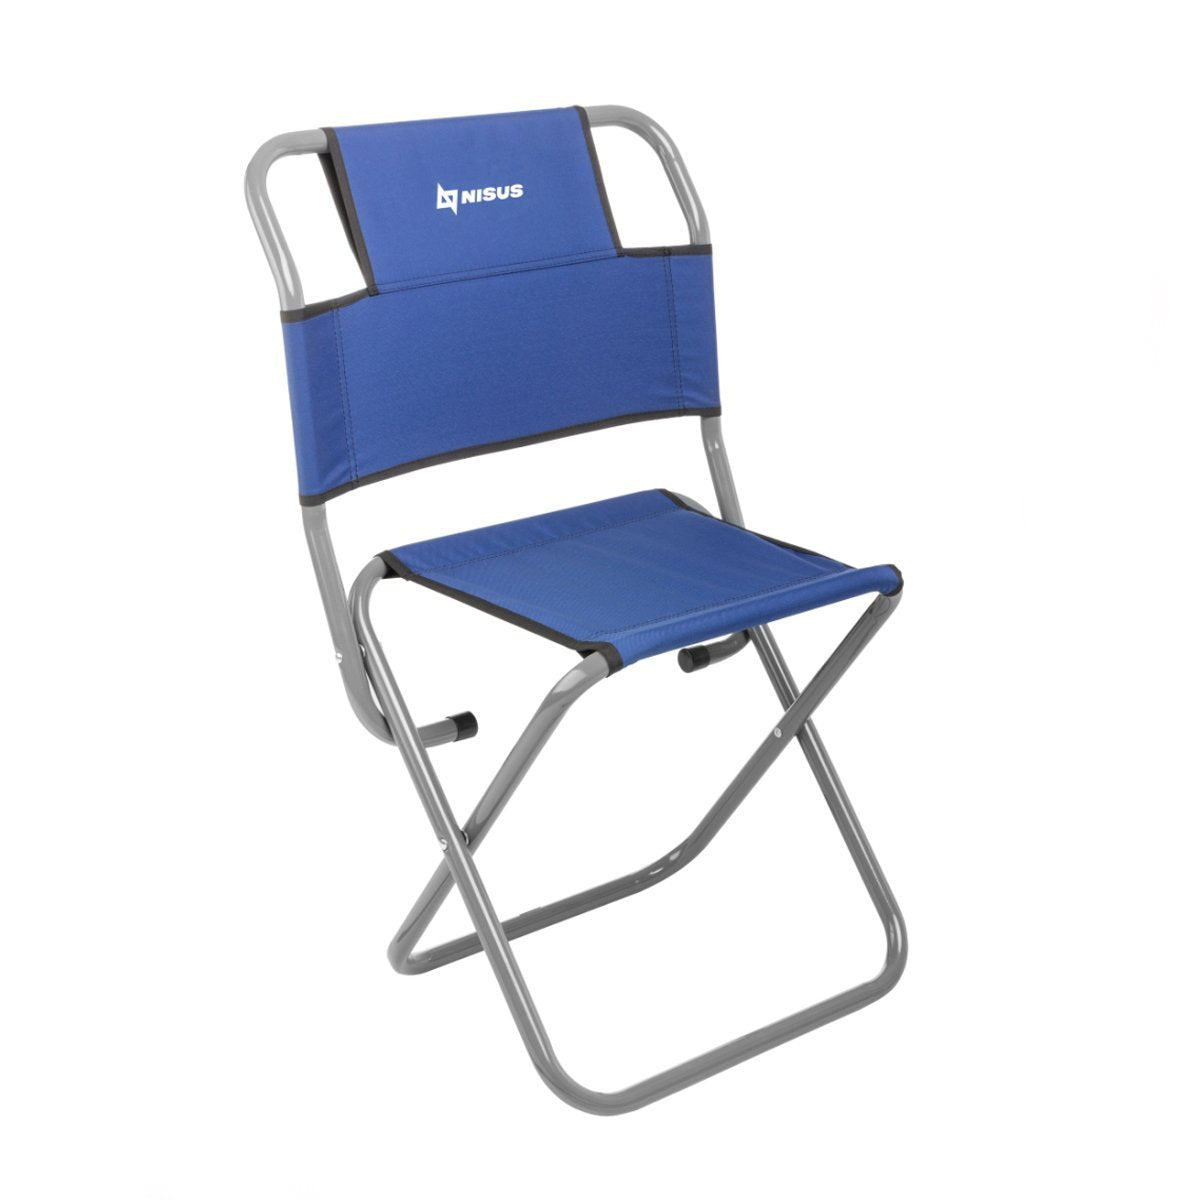 Lightweight Folding Camping Chair for Outdoor and Picnic